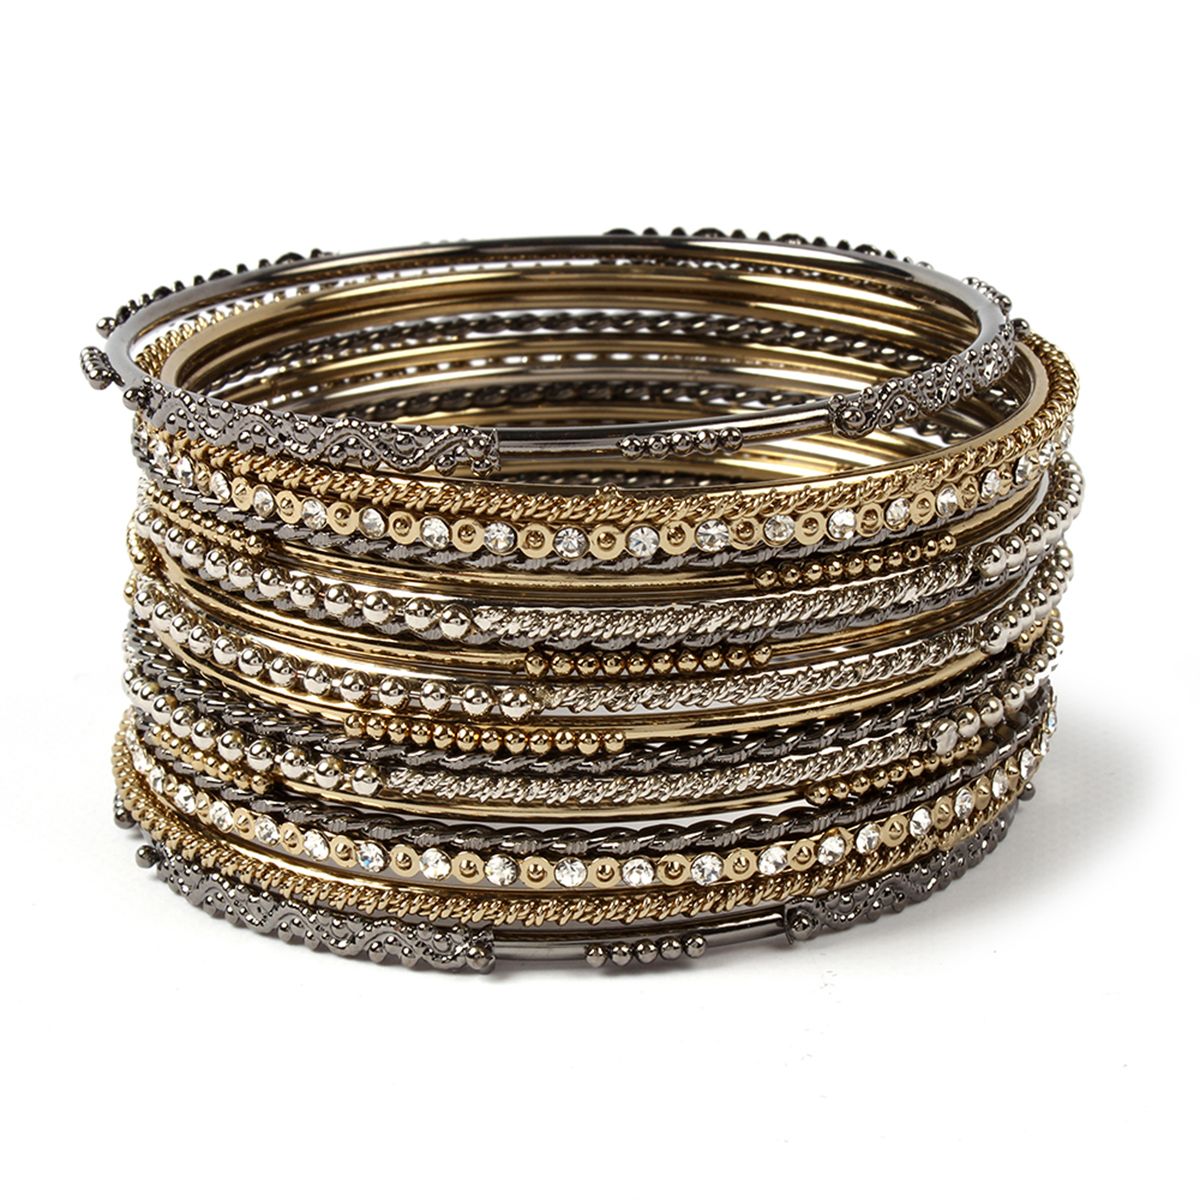 Add a Touch of Glamour: Metal Bangles for Every Occasion